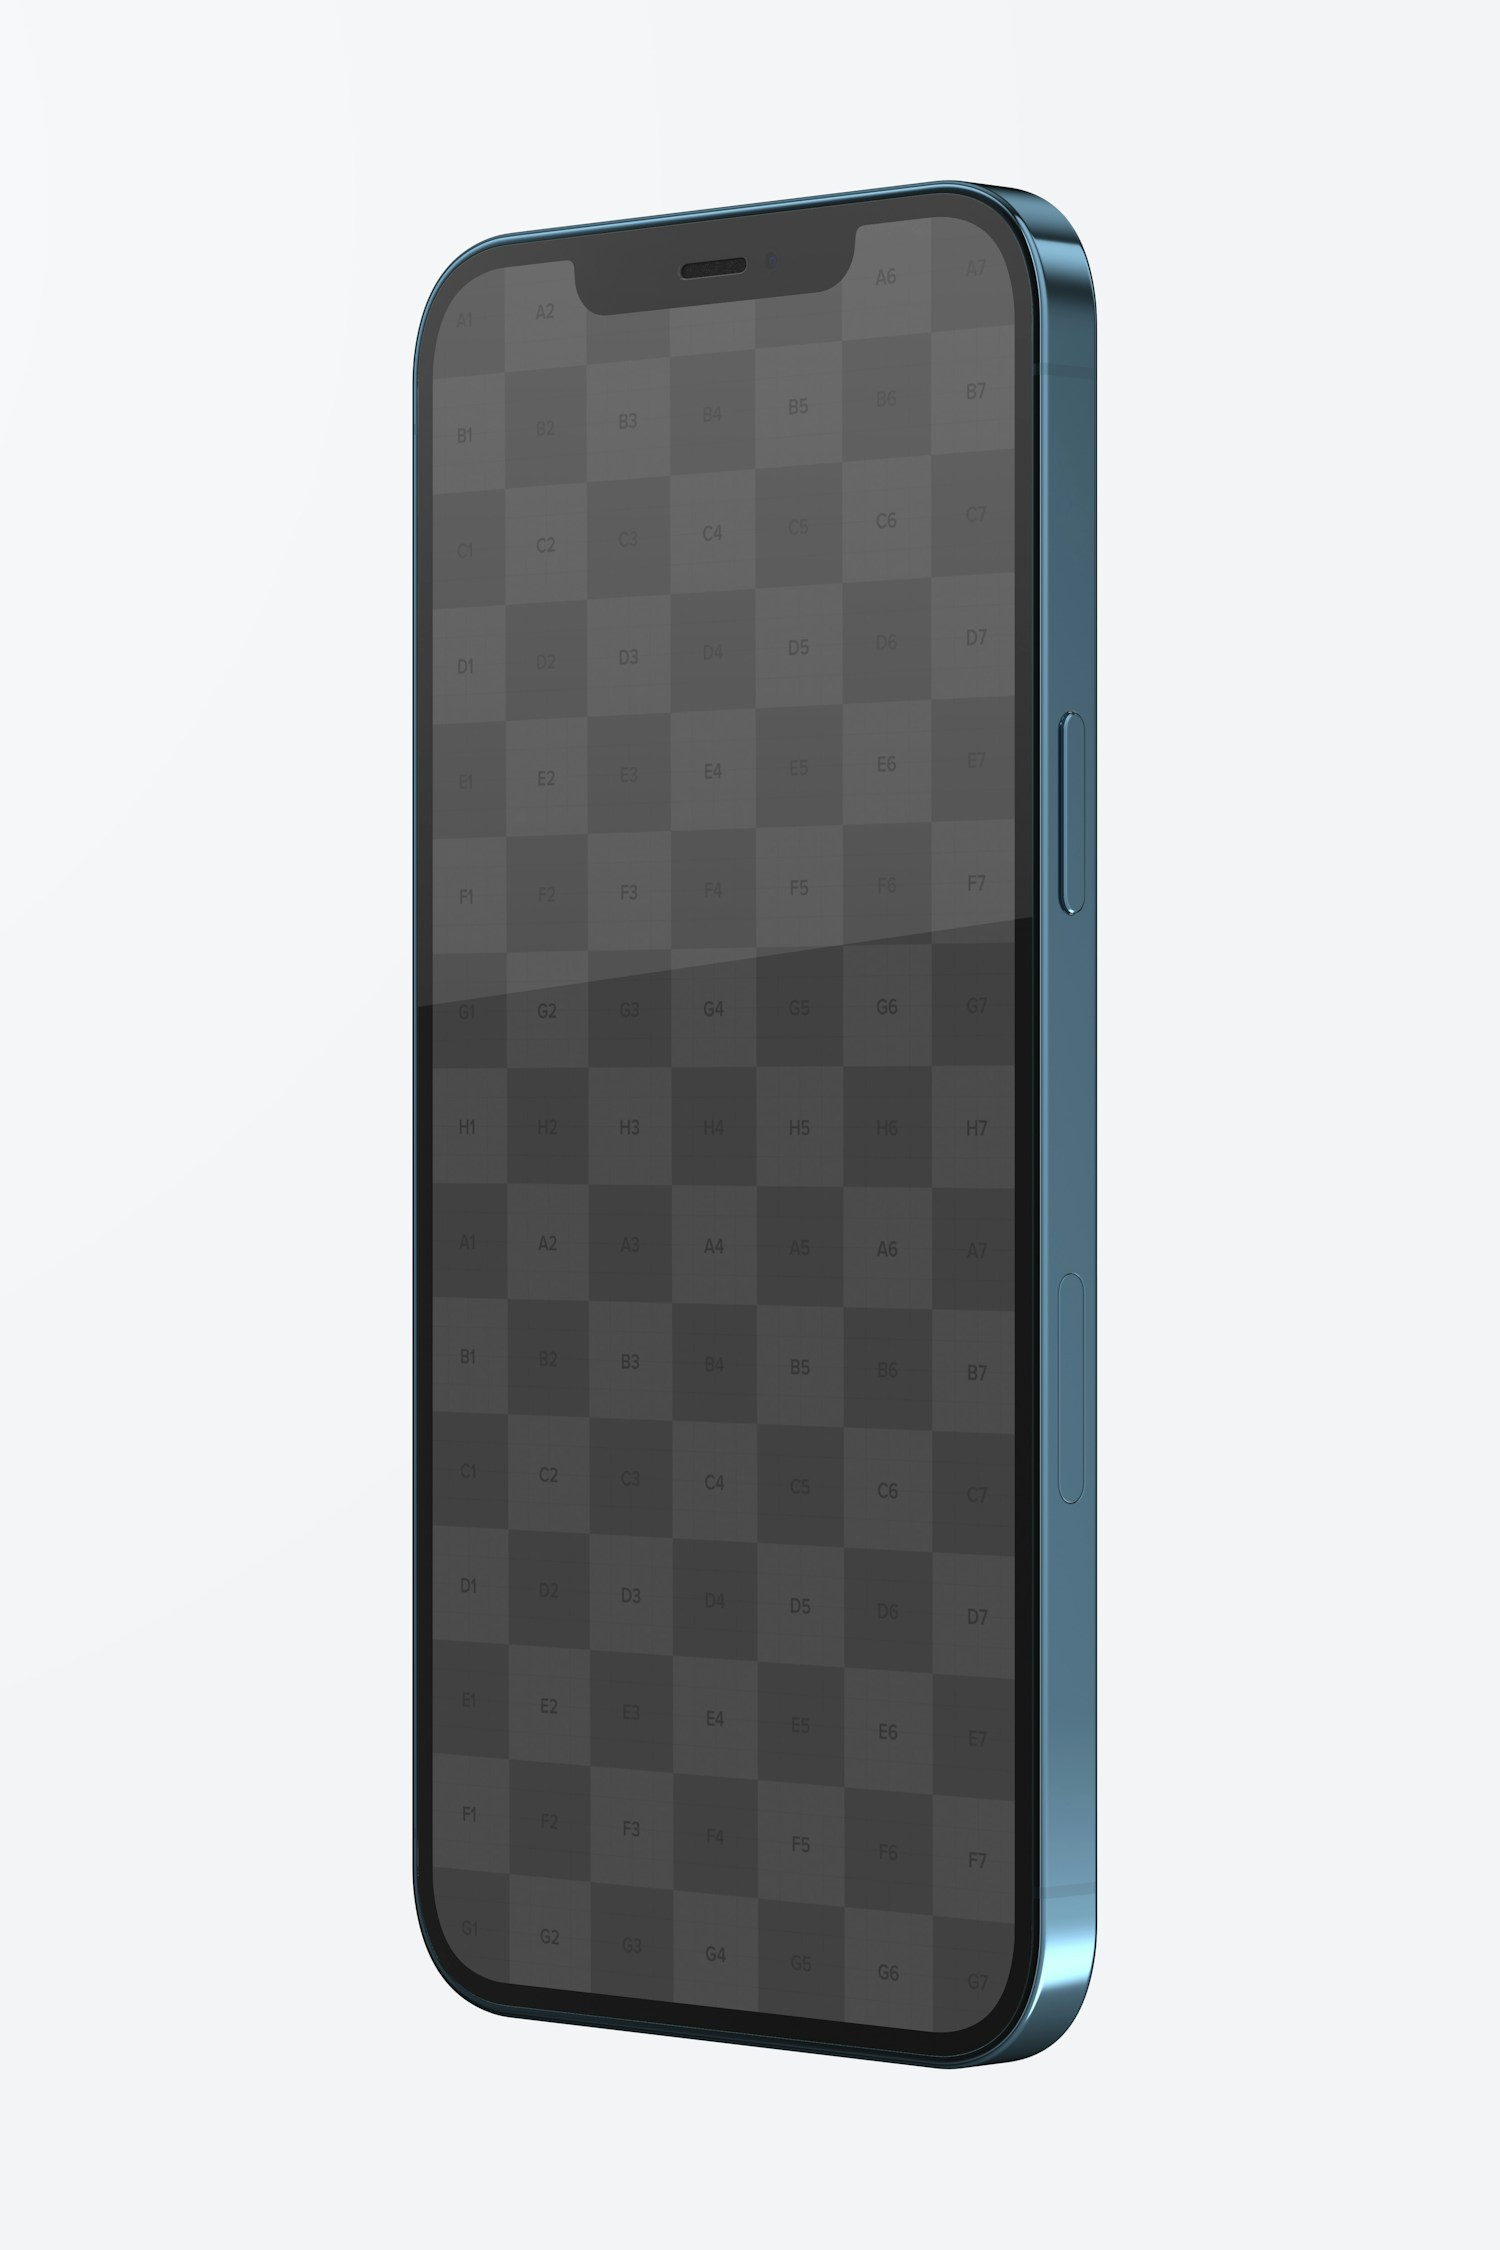 iPhone 12 Mockup, Left Side View